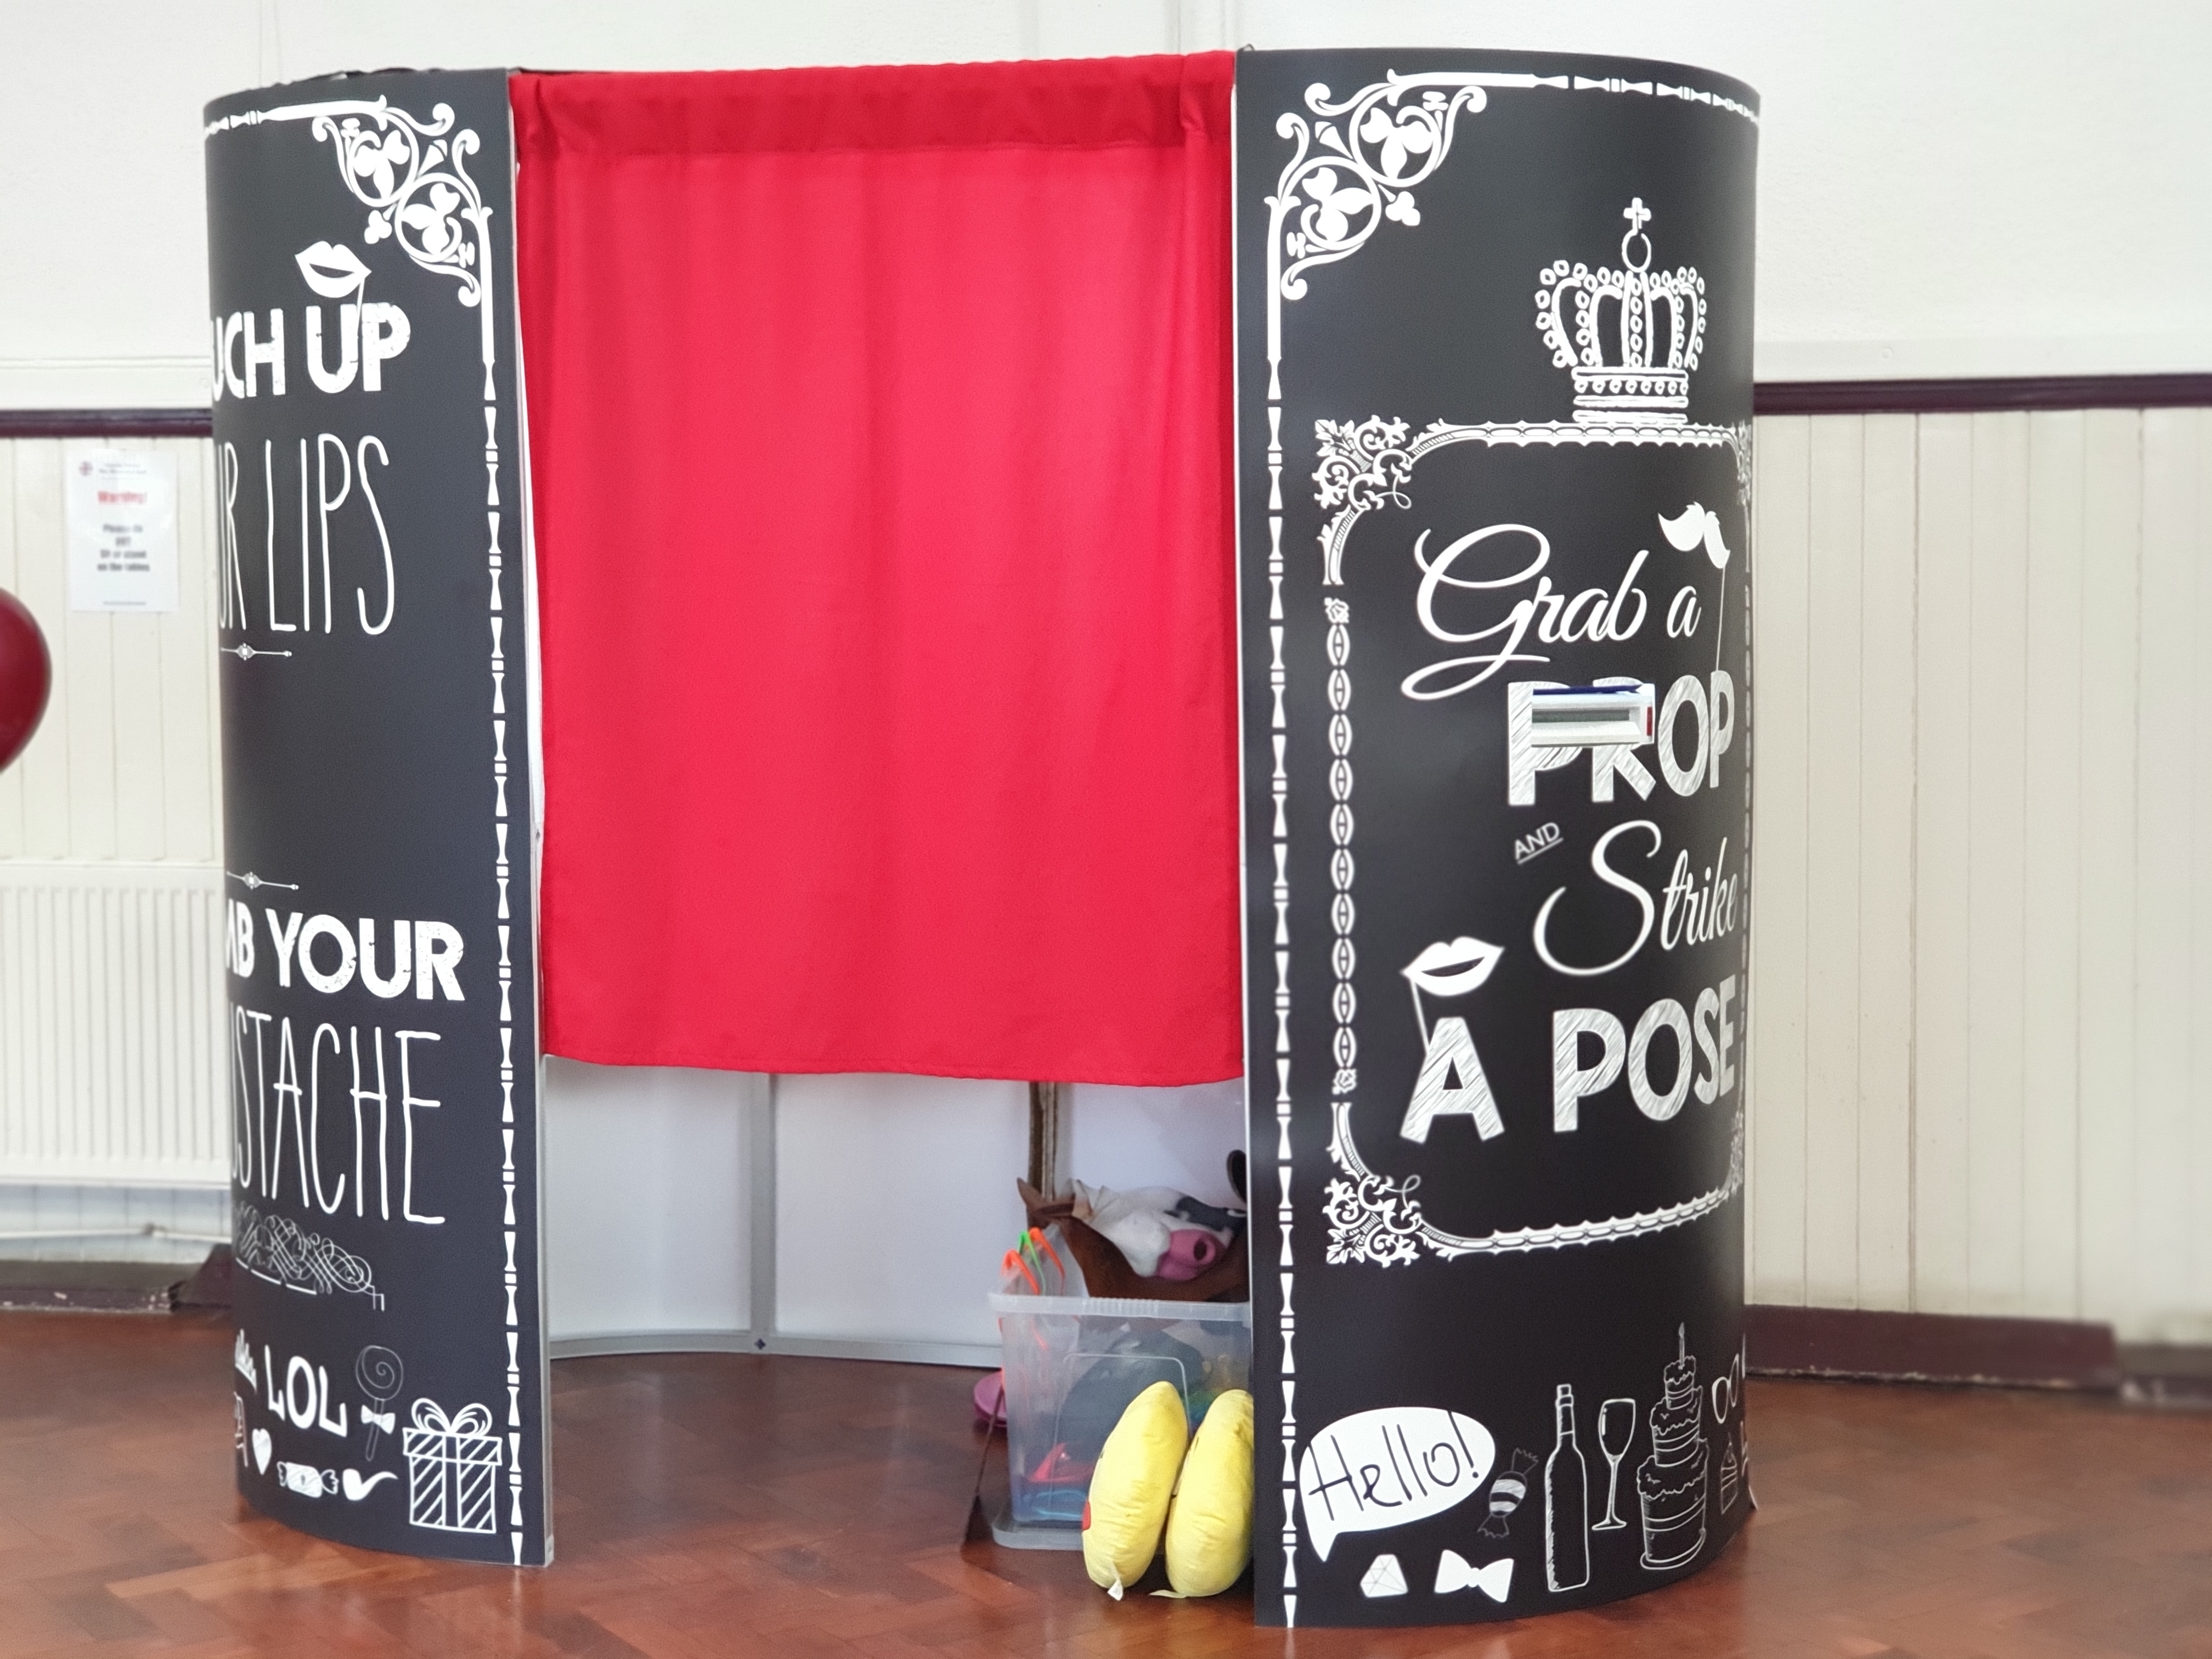 New photobooth for 2019